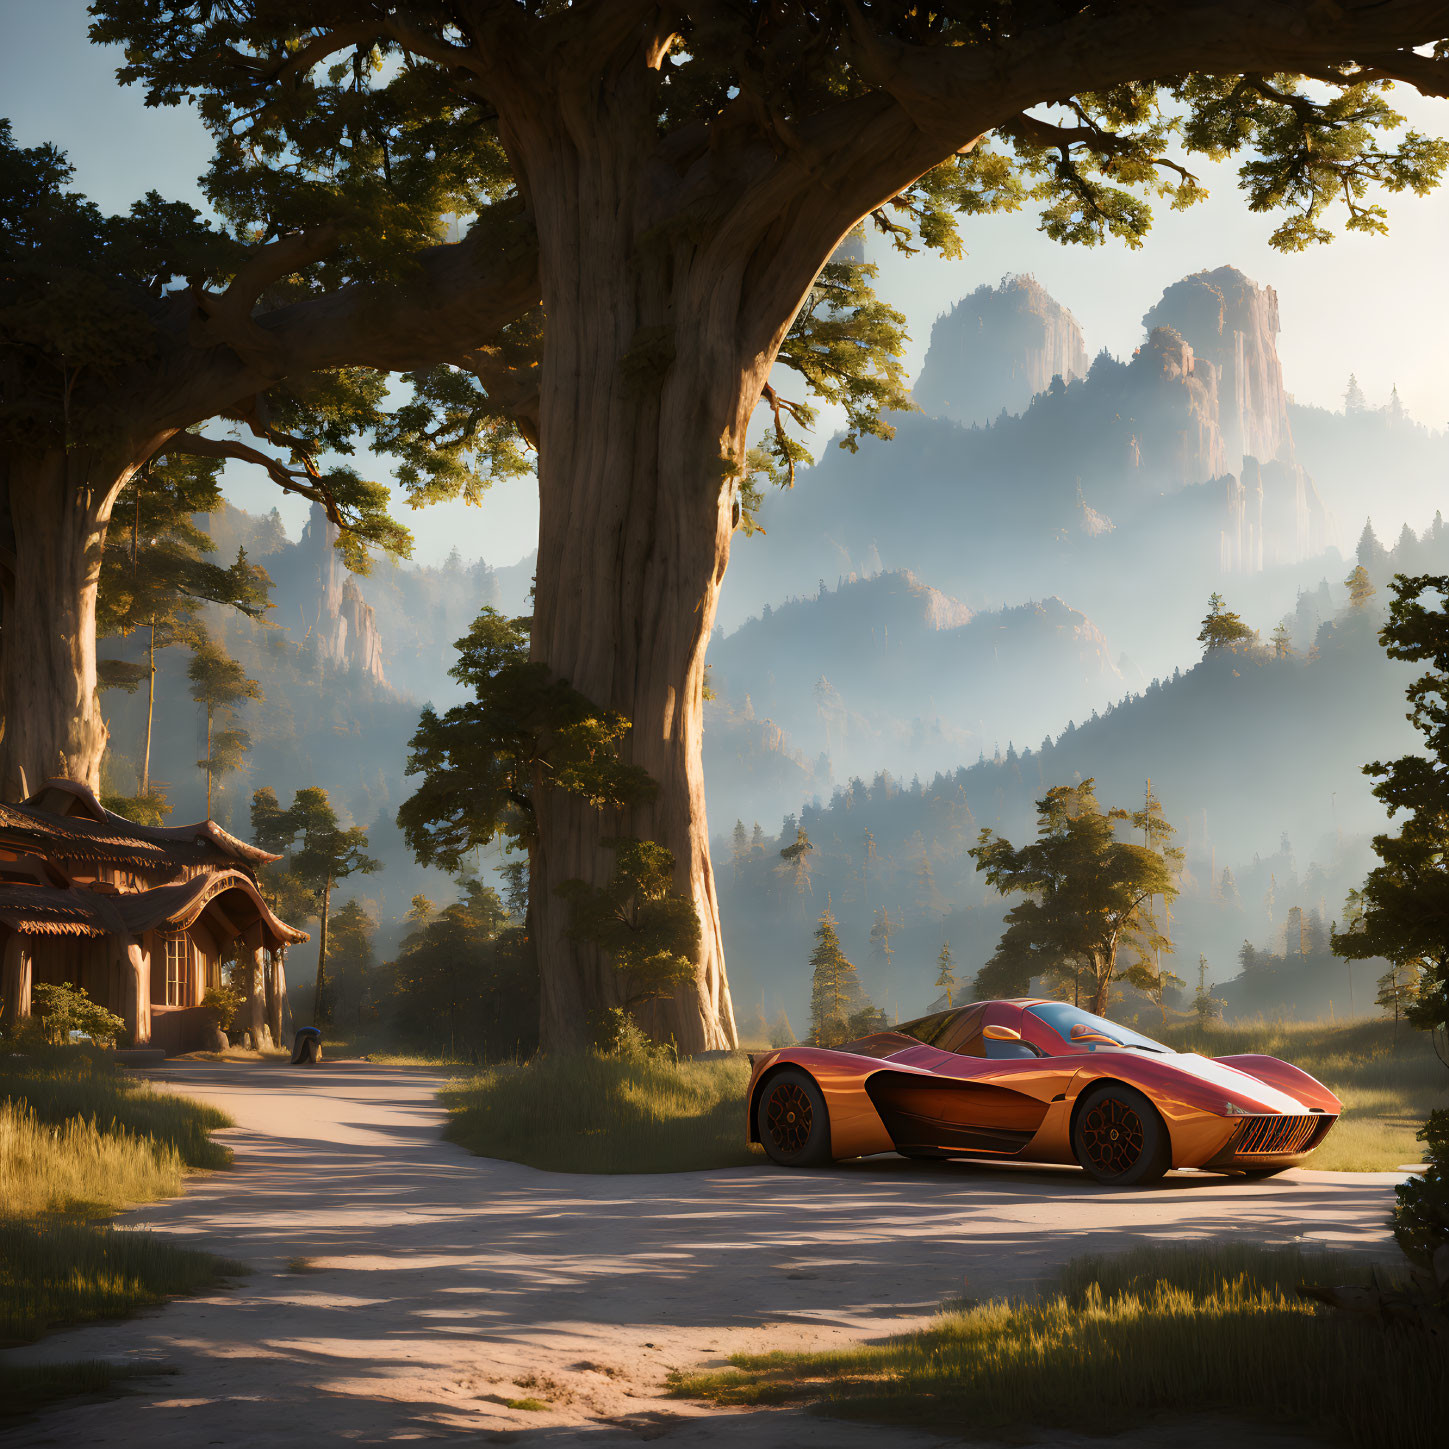 Red sports car on forest road at sunset with trees, wooden house, and mountains.